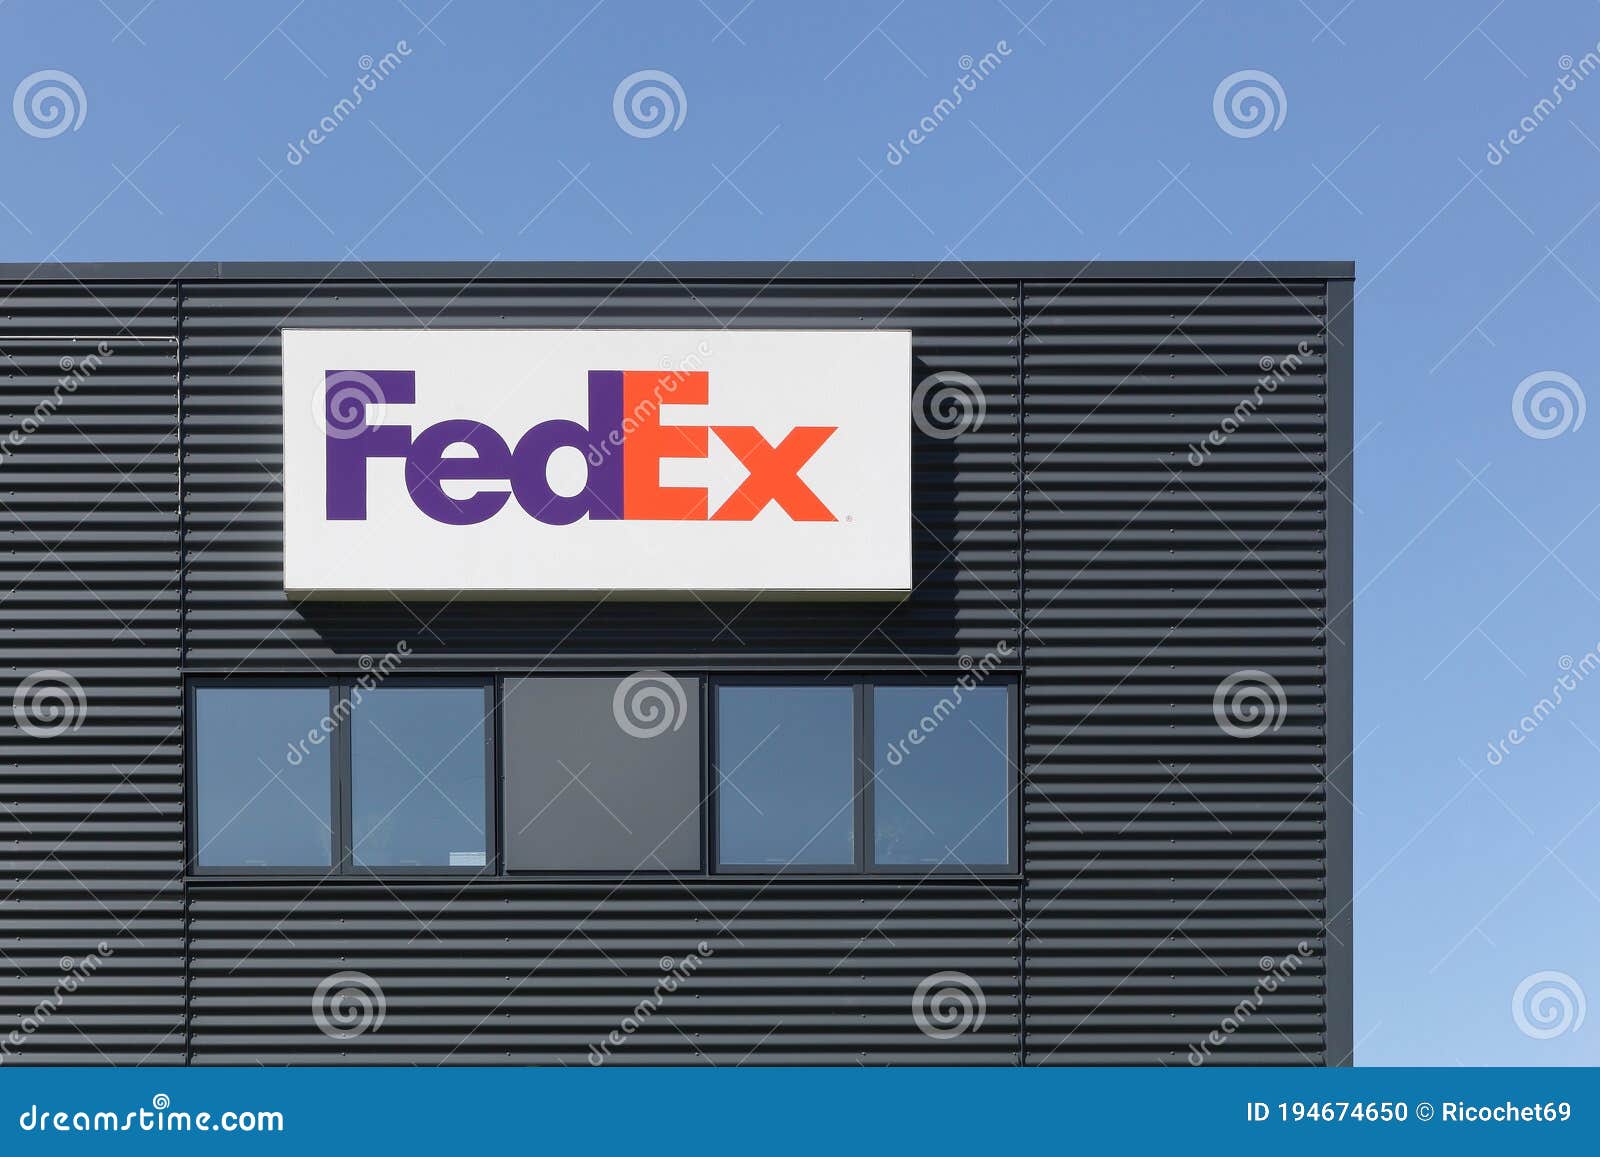 FedEx Building and Warehouse Editorial Image - Image of express ...